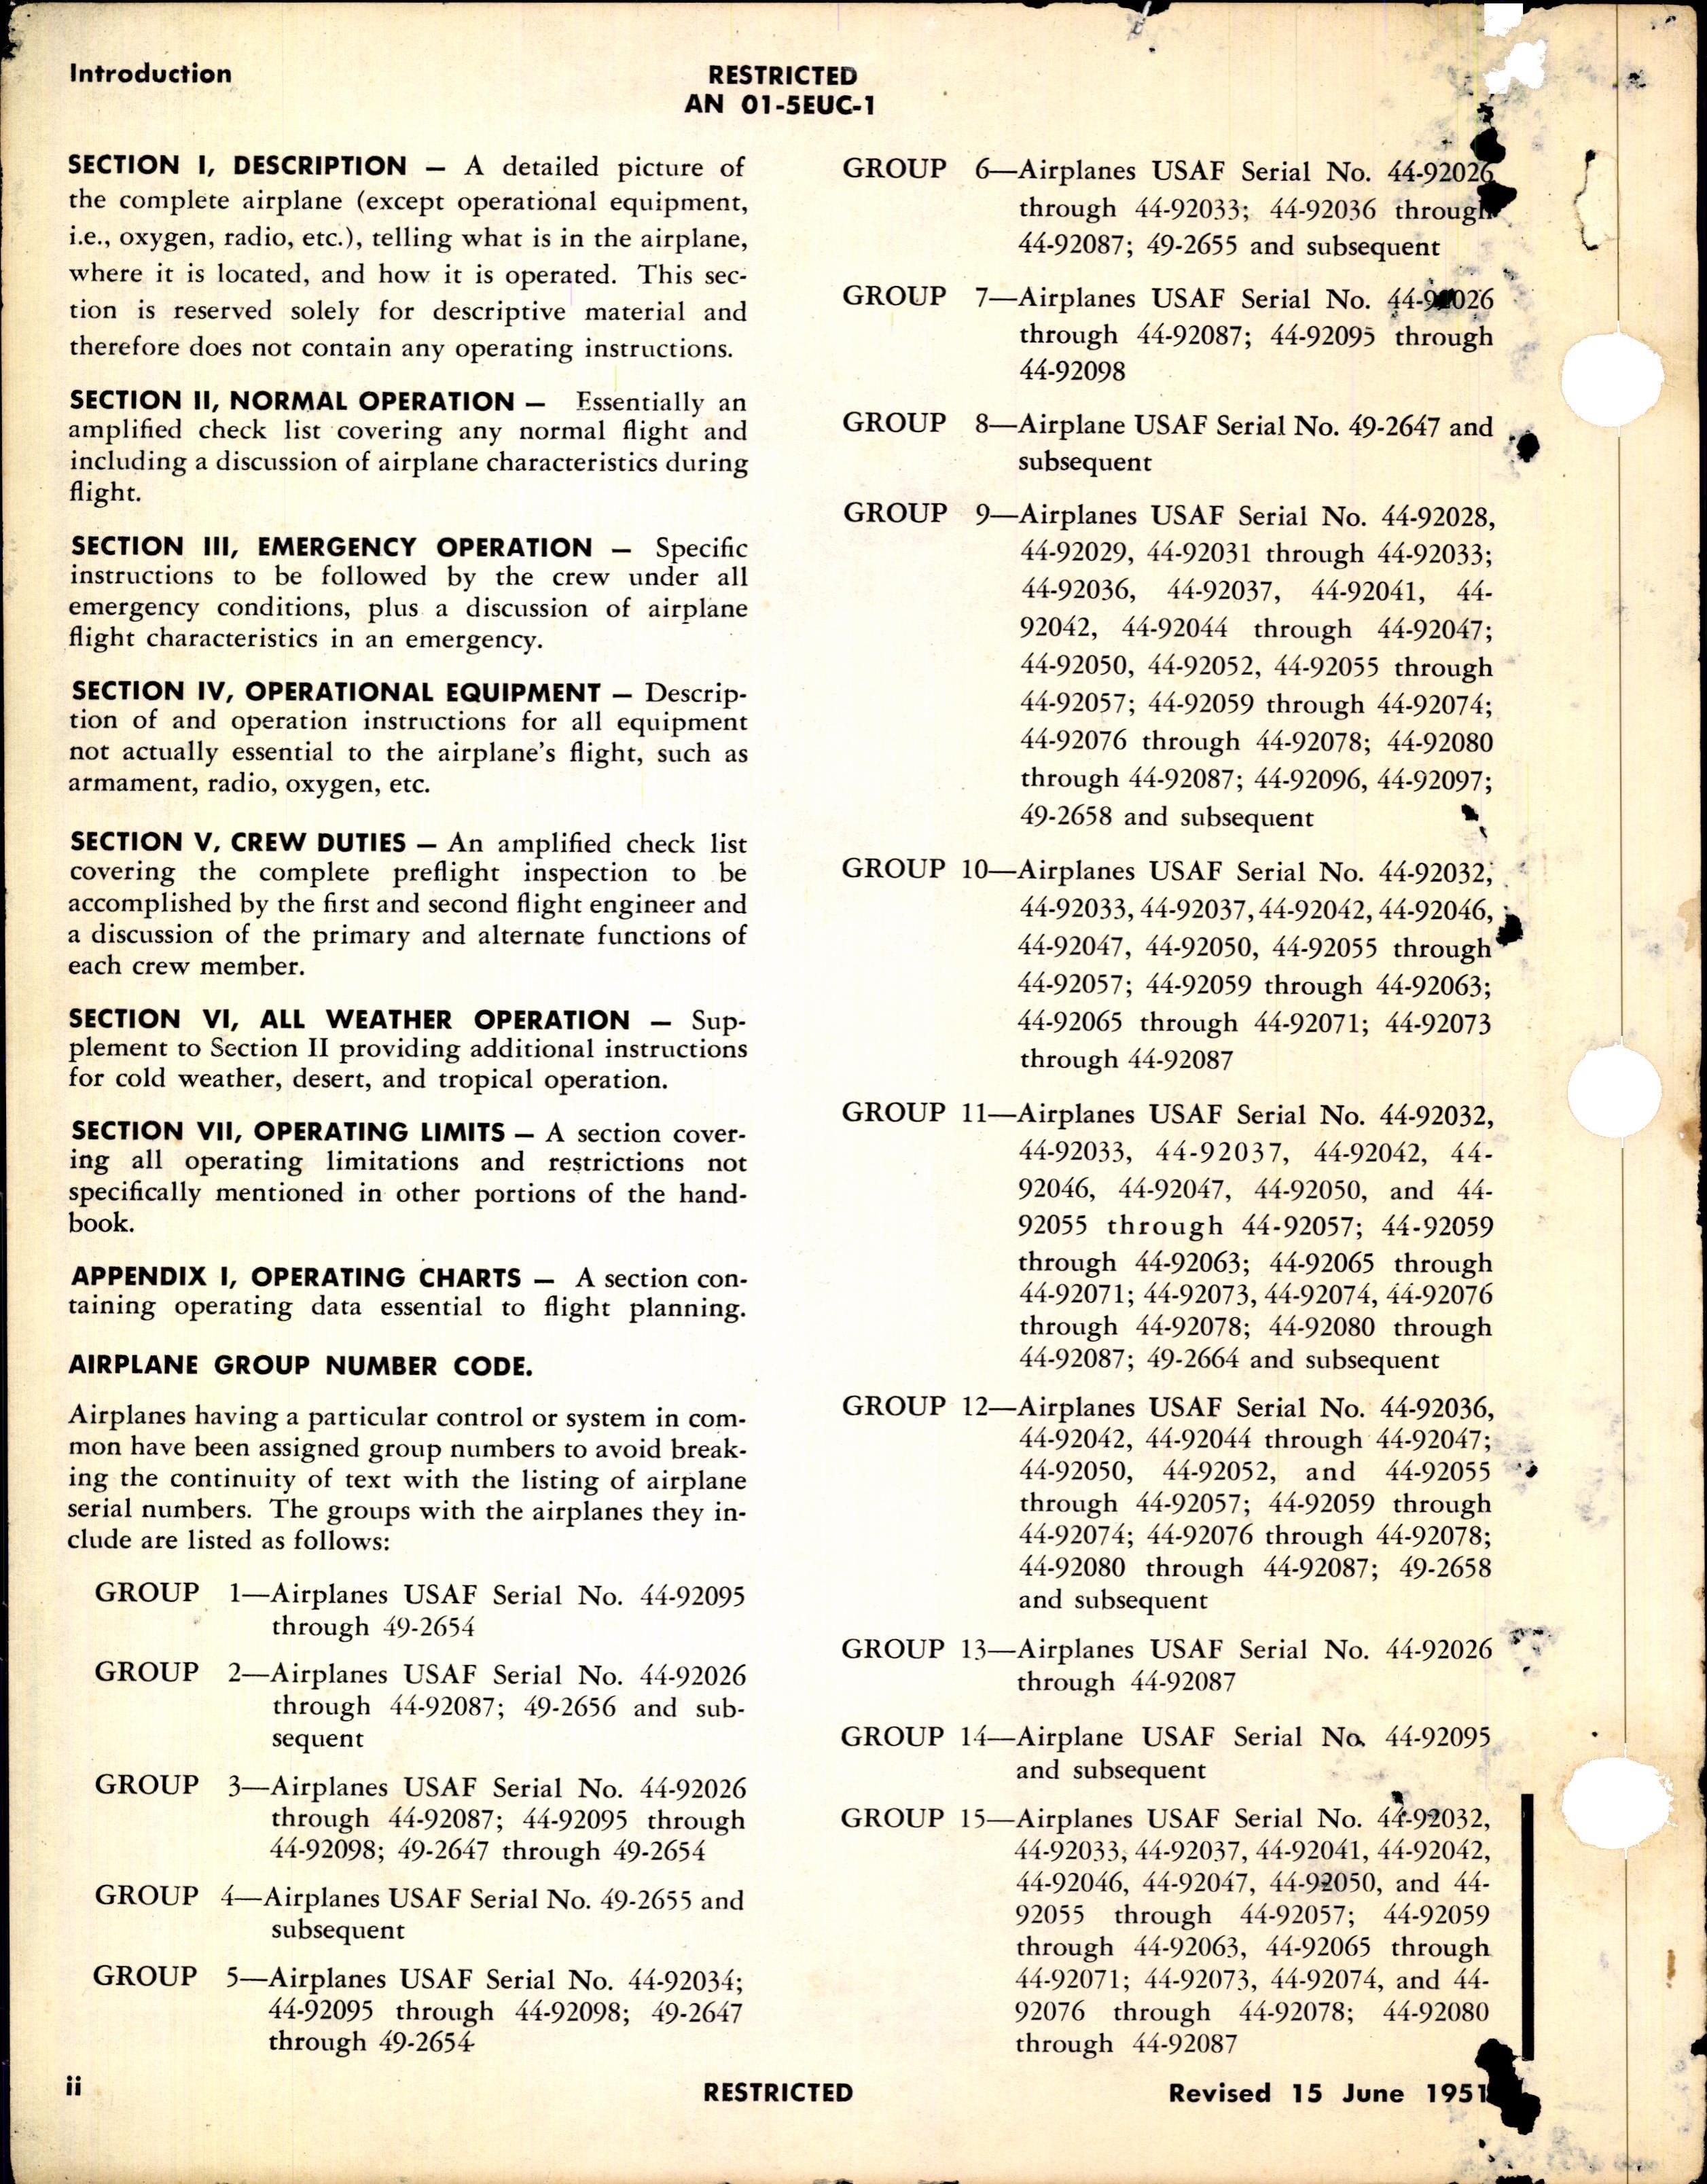 Sample page 2 from AirCorps Library document: Flight Instructions for B-36D Aircraft